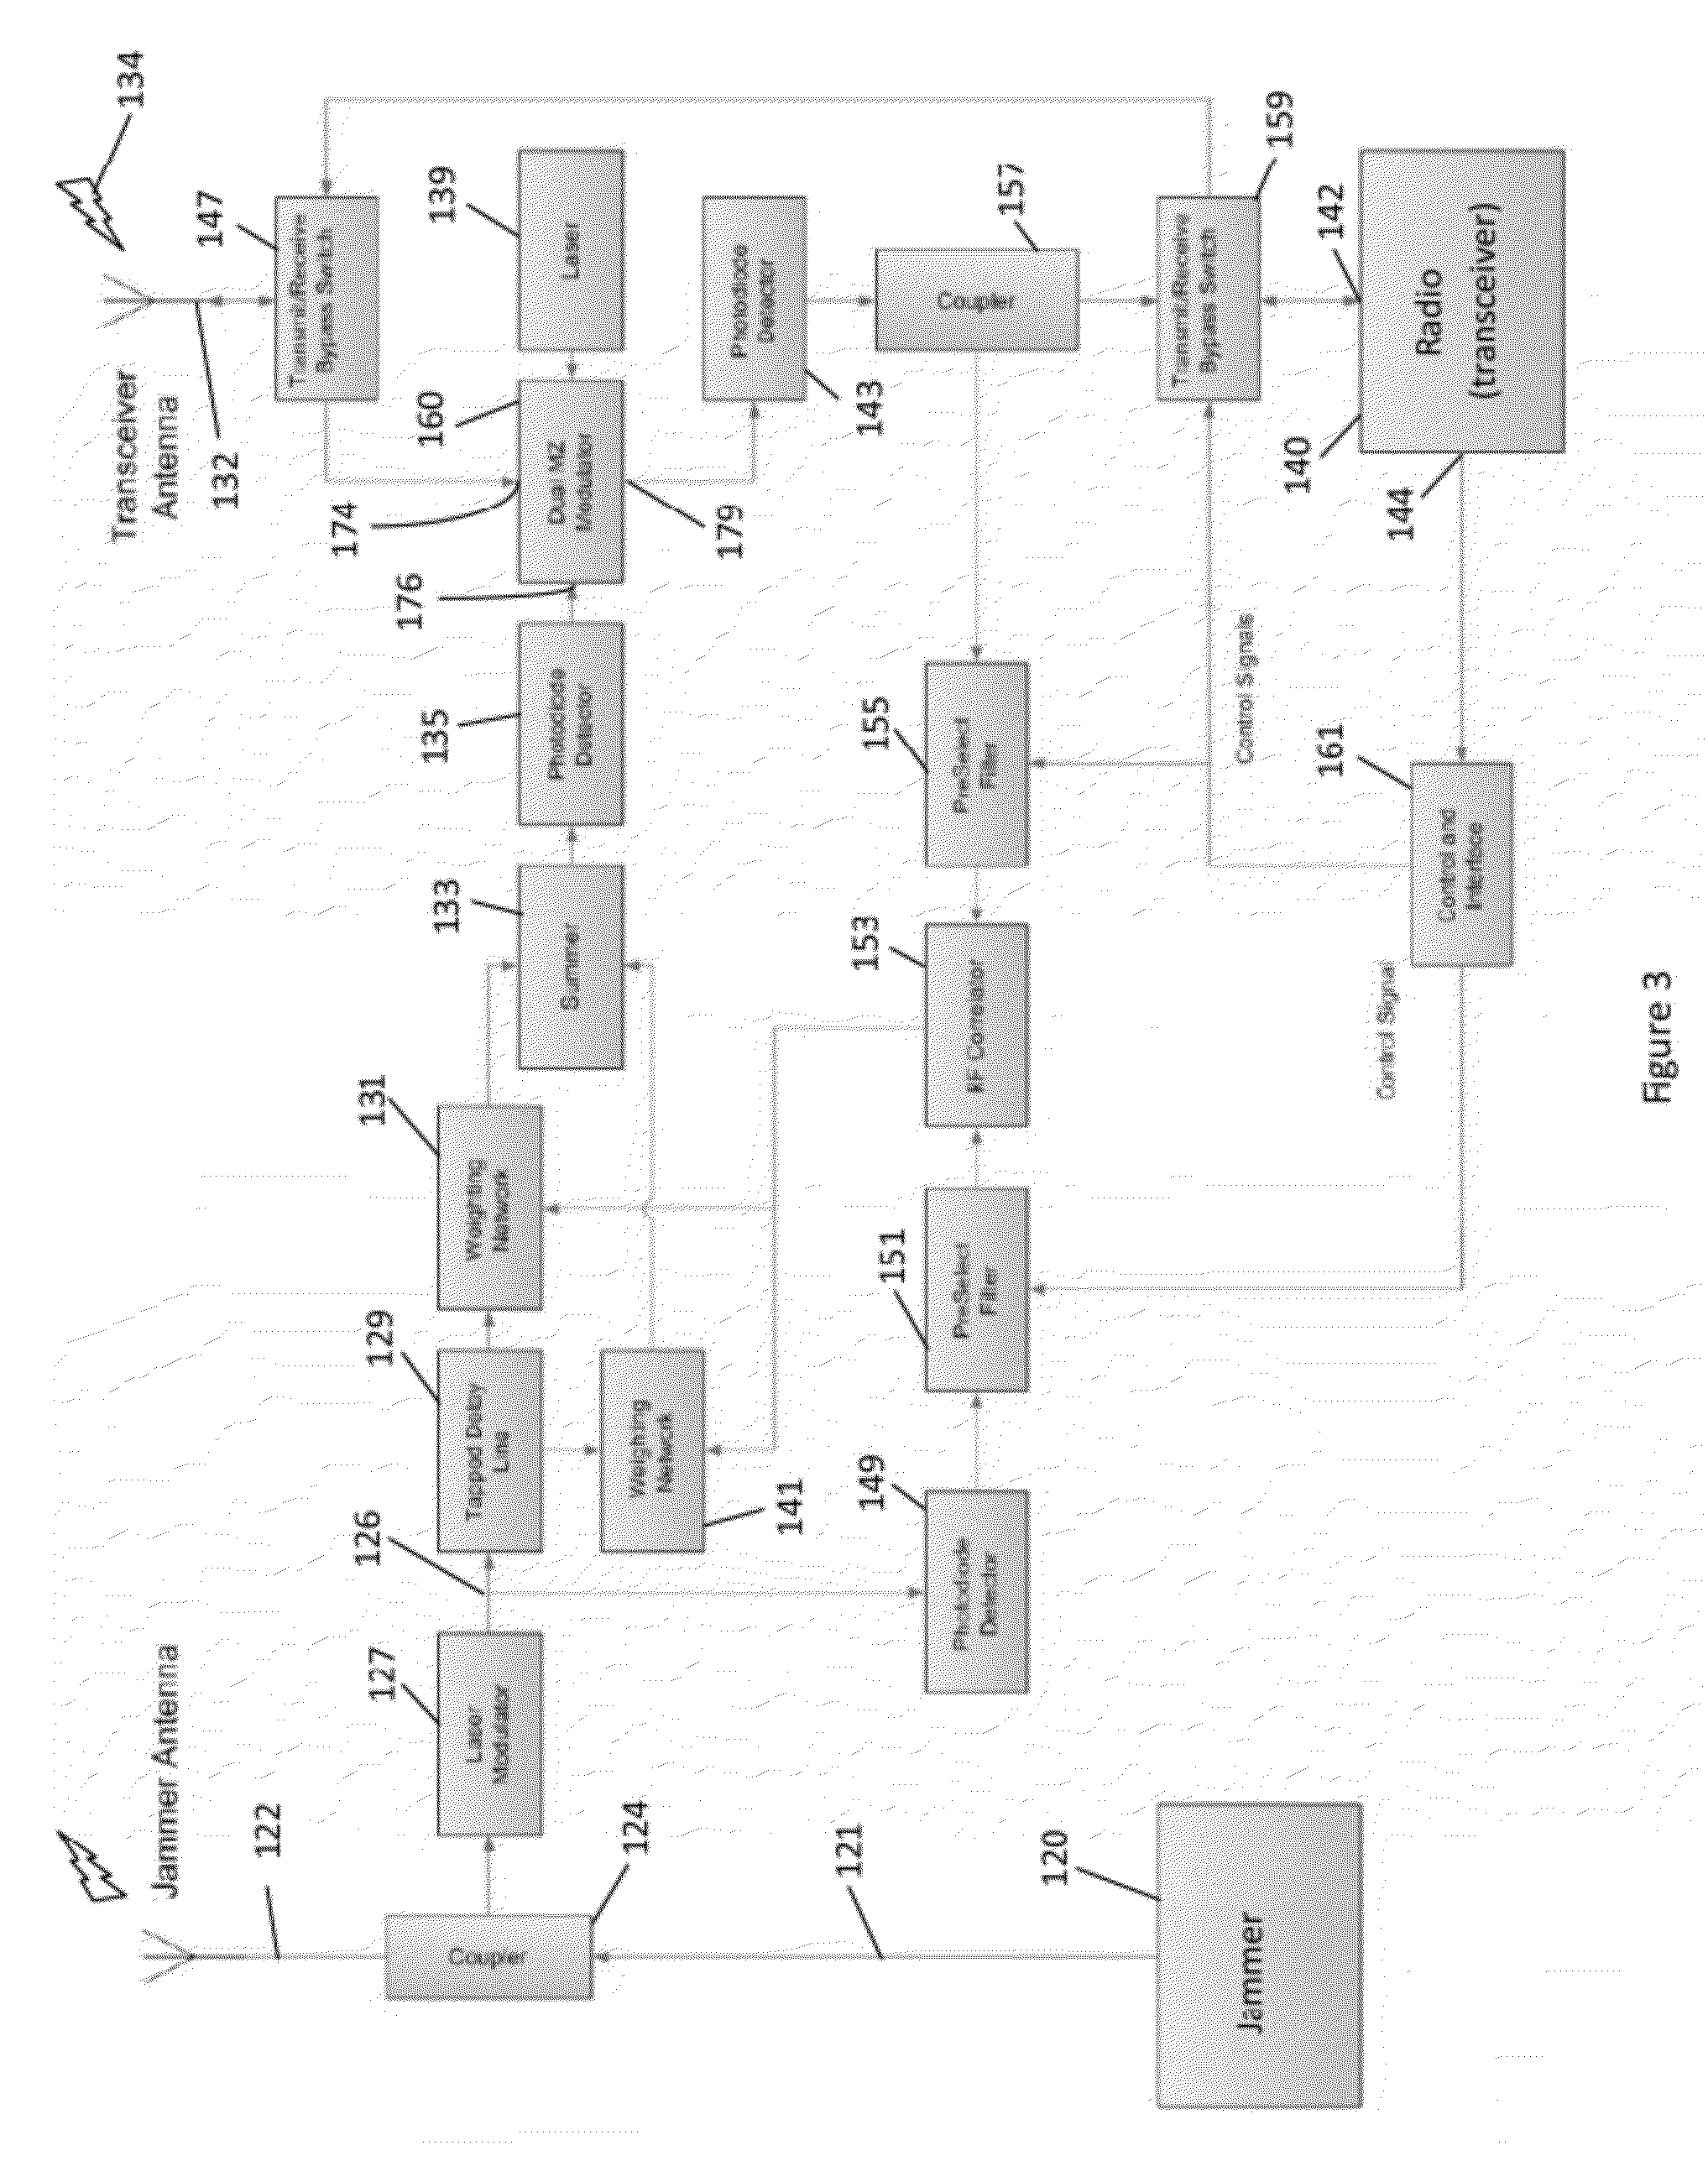 System and method for broadband RF interference cancellation